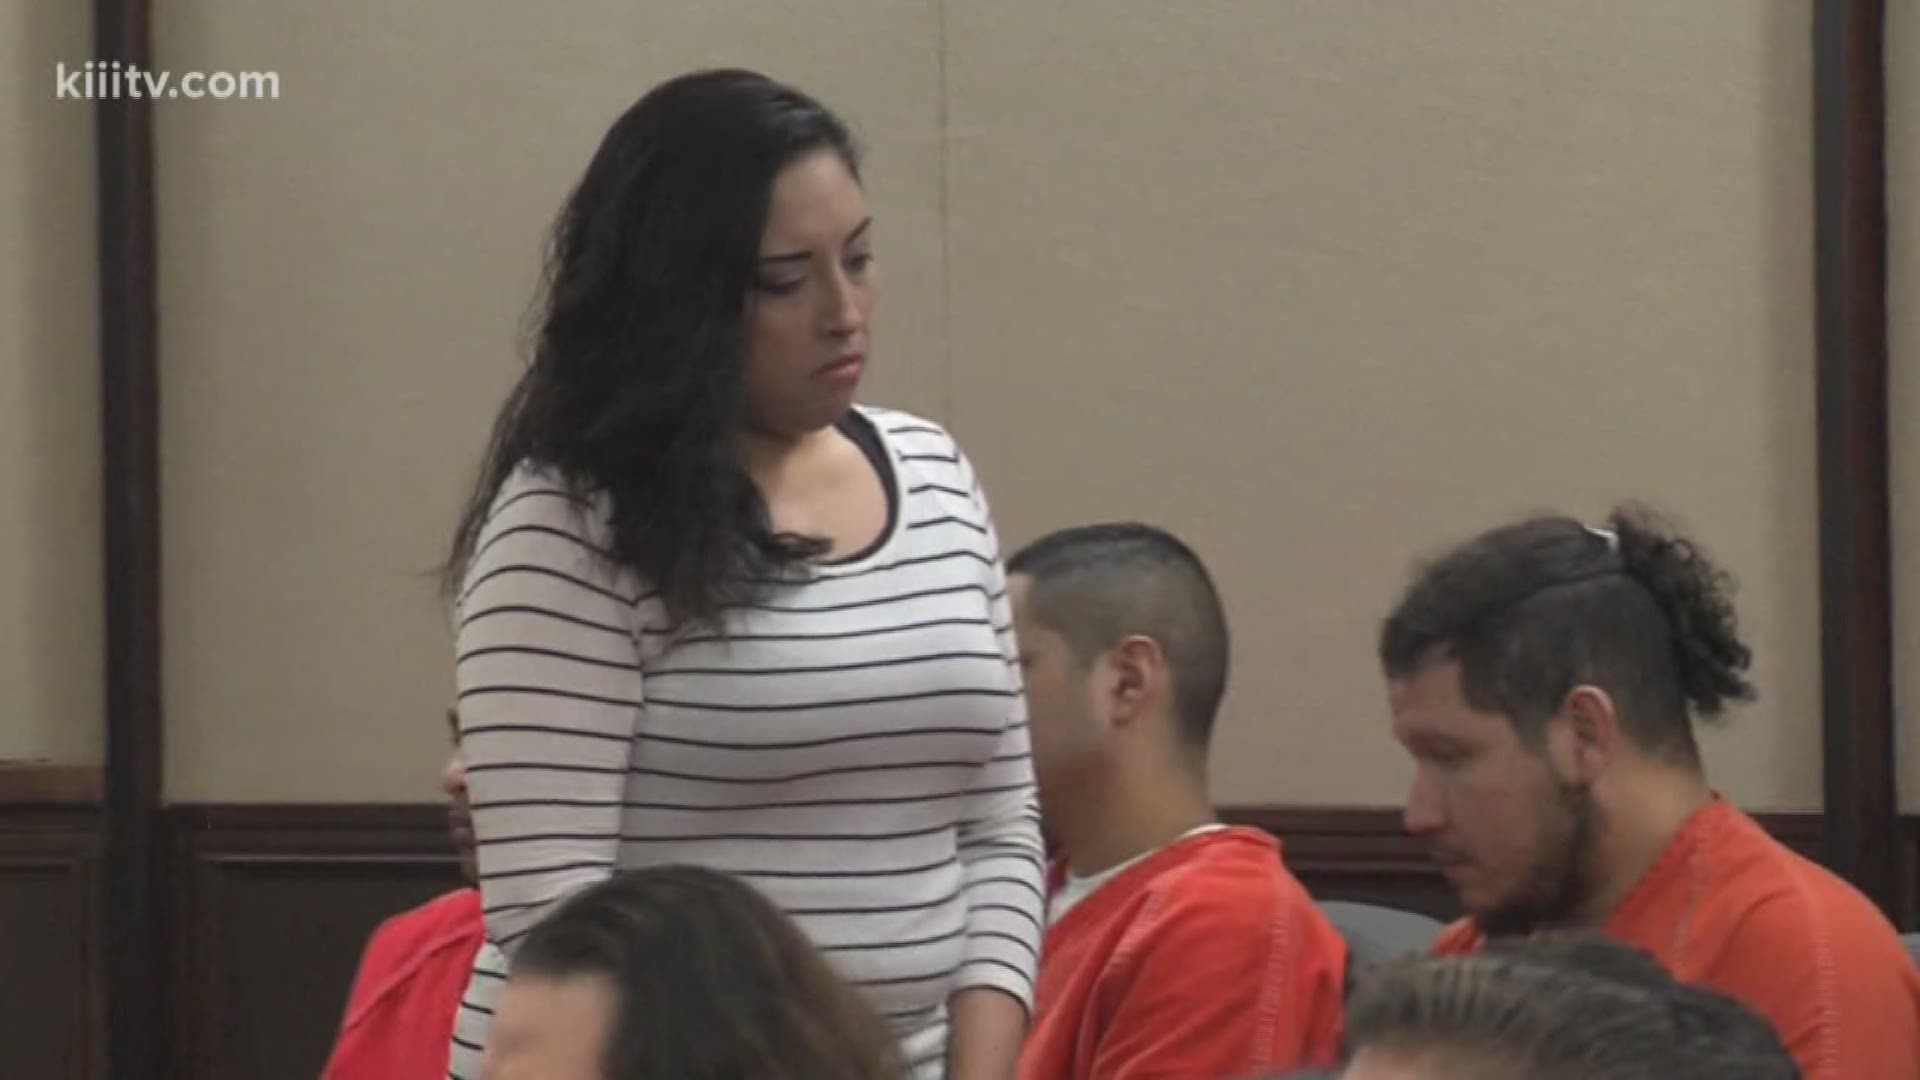 A woman accused of taking part in a gruesome murder is now back in jail for breaking her bond conditions.